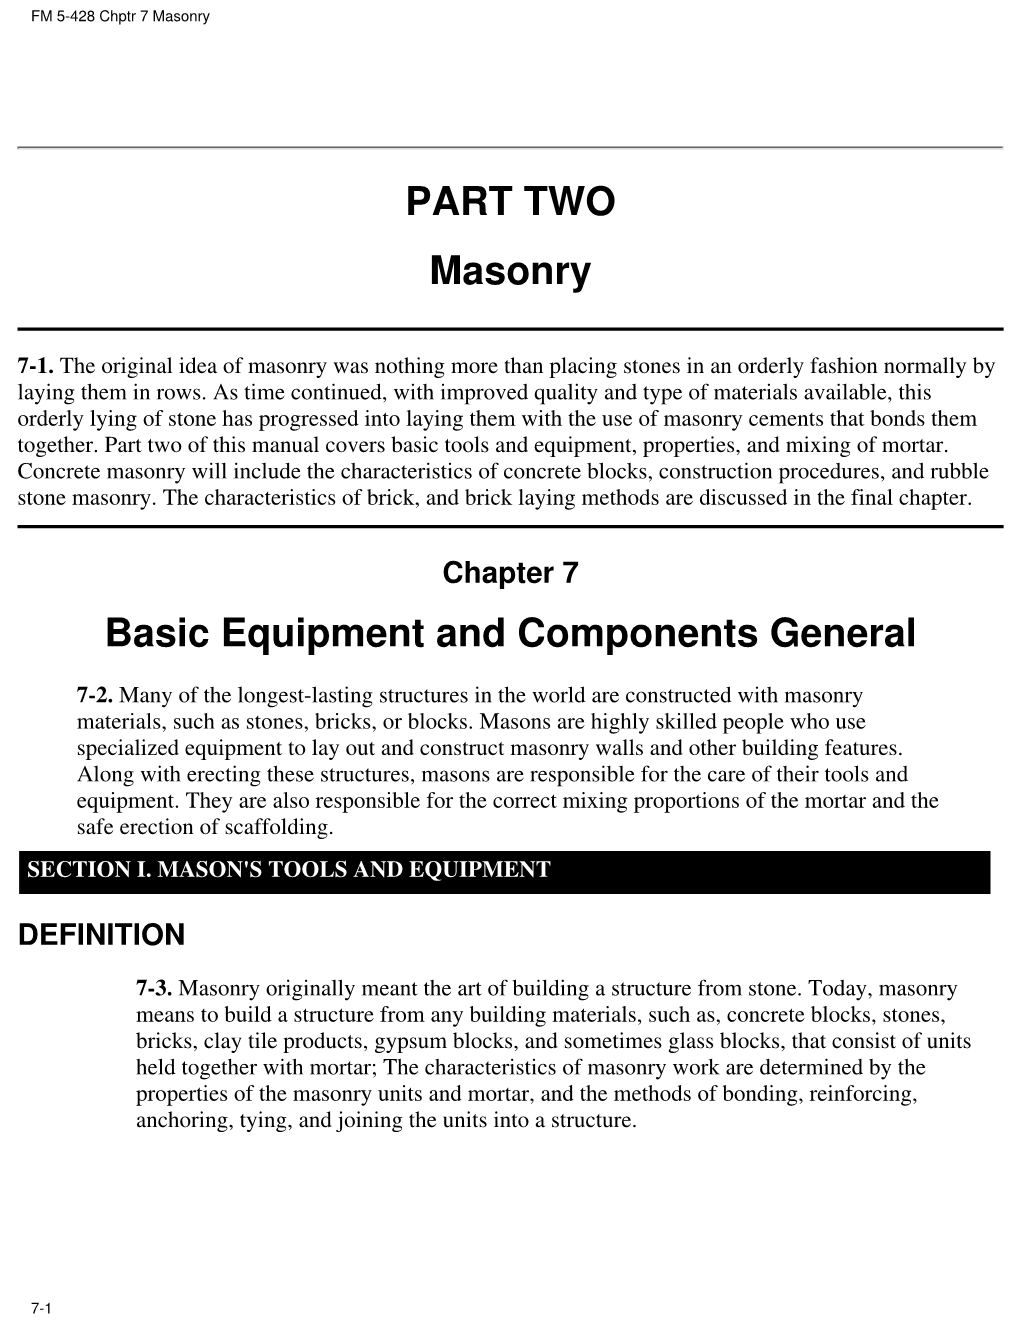 PART TWO Masonry Basic Equipment and Components General